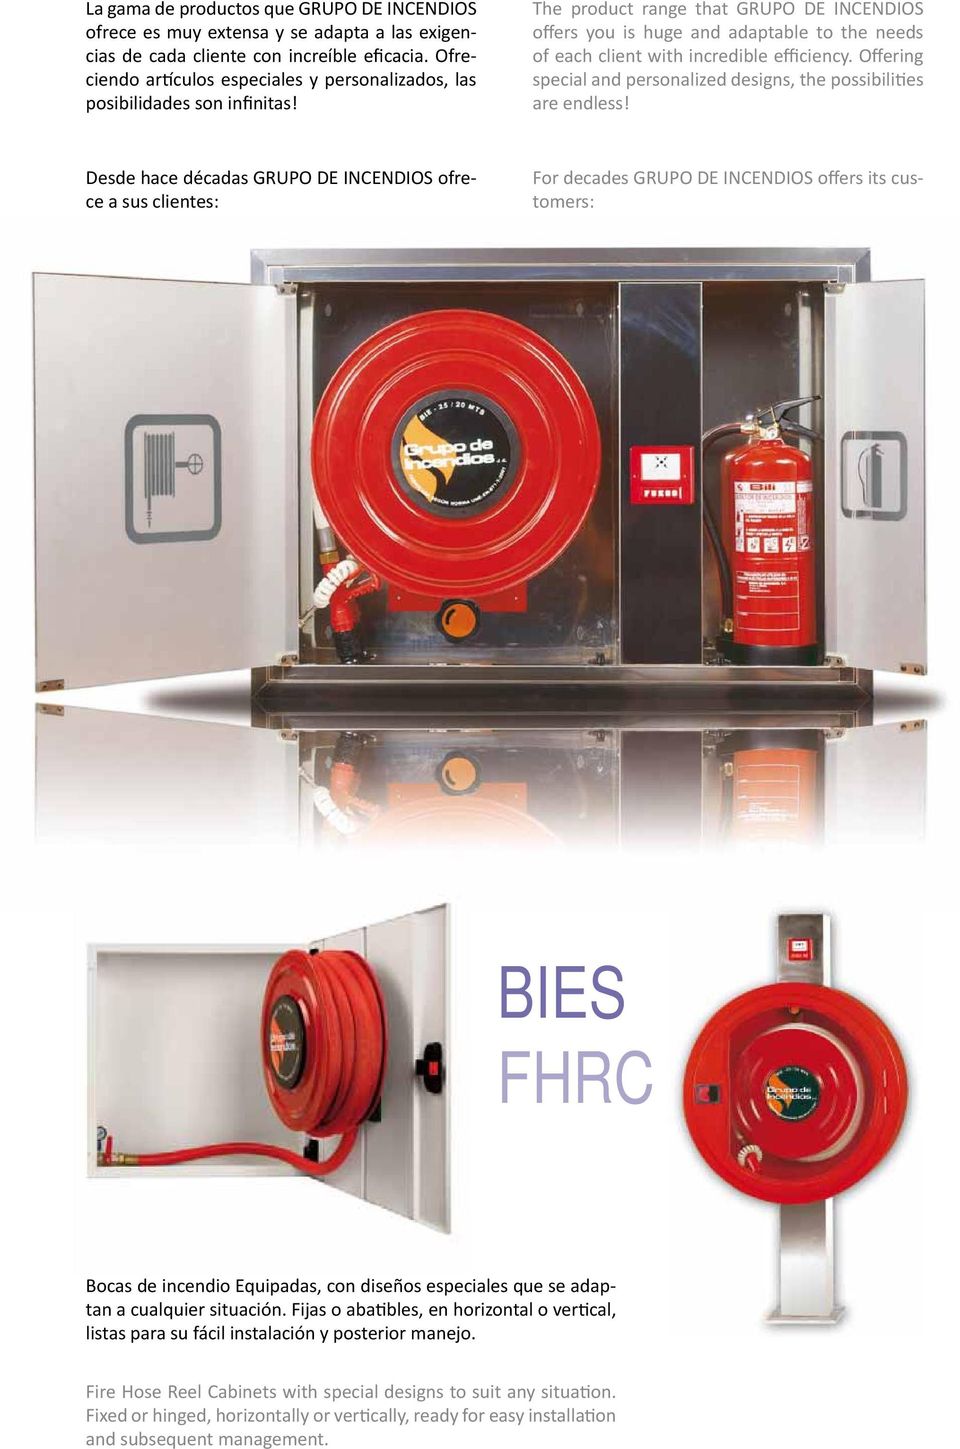 The product range that GRUPO DE INCENDIOS offers you is huge and adaptable to the needs of each client with incredible efficiency.